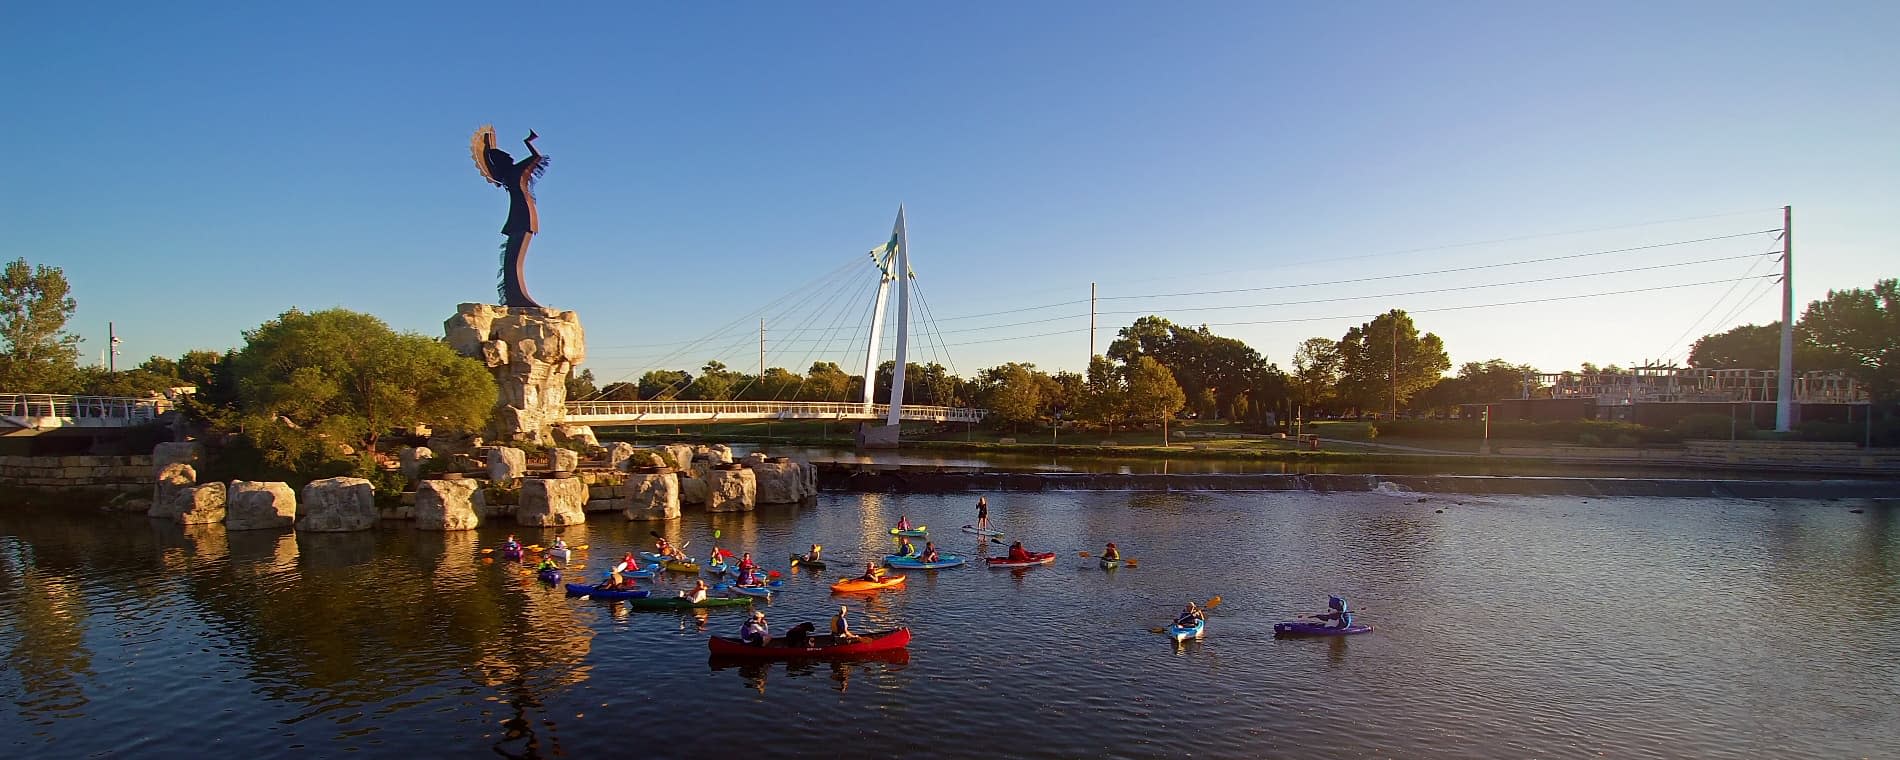 kayaks on the arkansas river near the keeper of the plains in wichita